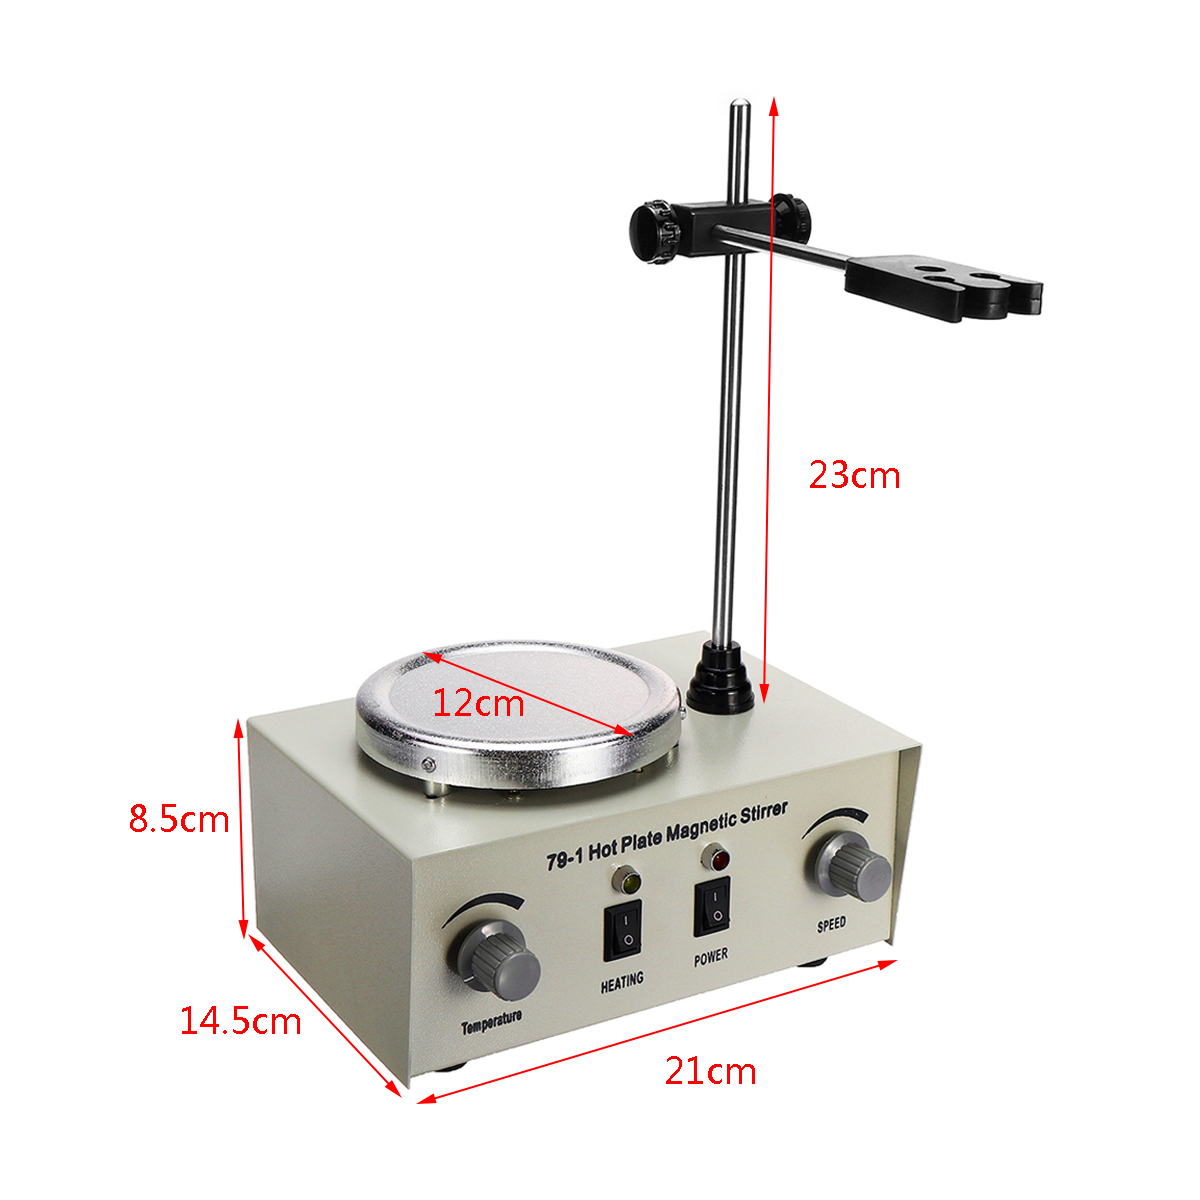 79-1-1000ML-Hot-Plate-Magnetic-Stirrer-Lab-Heating-Mixer-Temperature-Speed-Adjustable-1298966-5